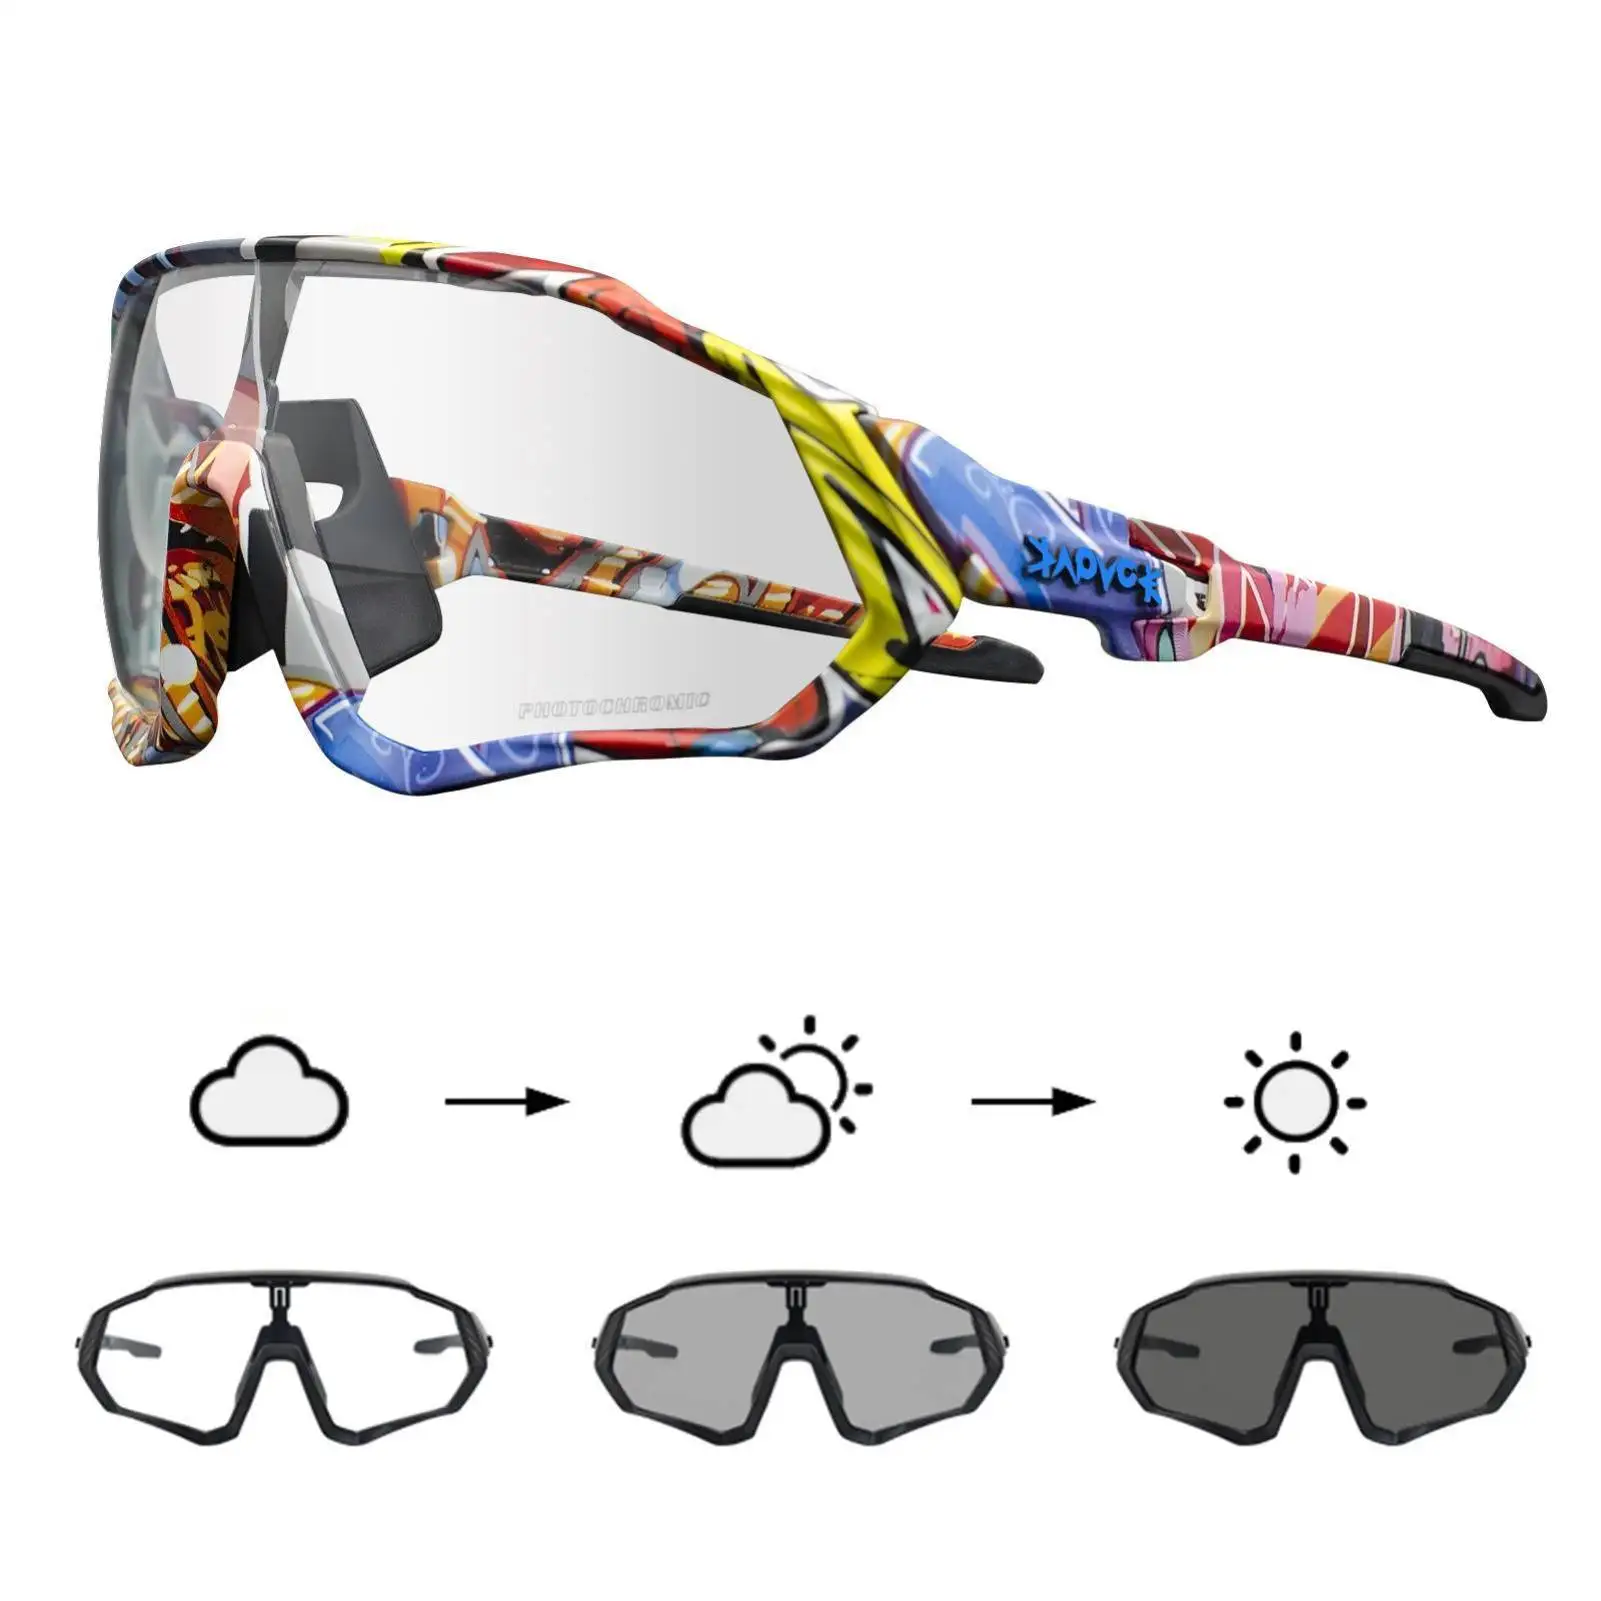 Kapvoe Photochromic Sports cycling Glasses and similar items